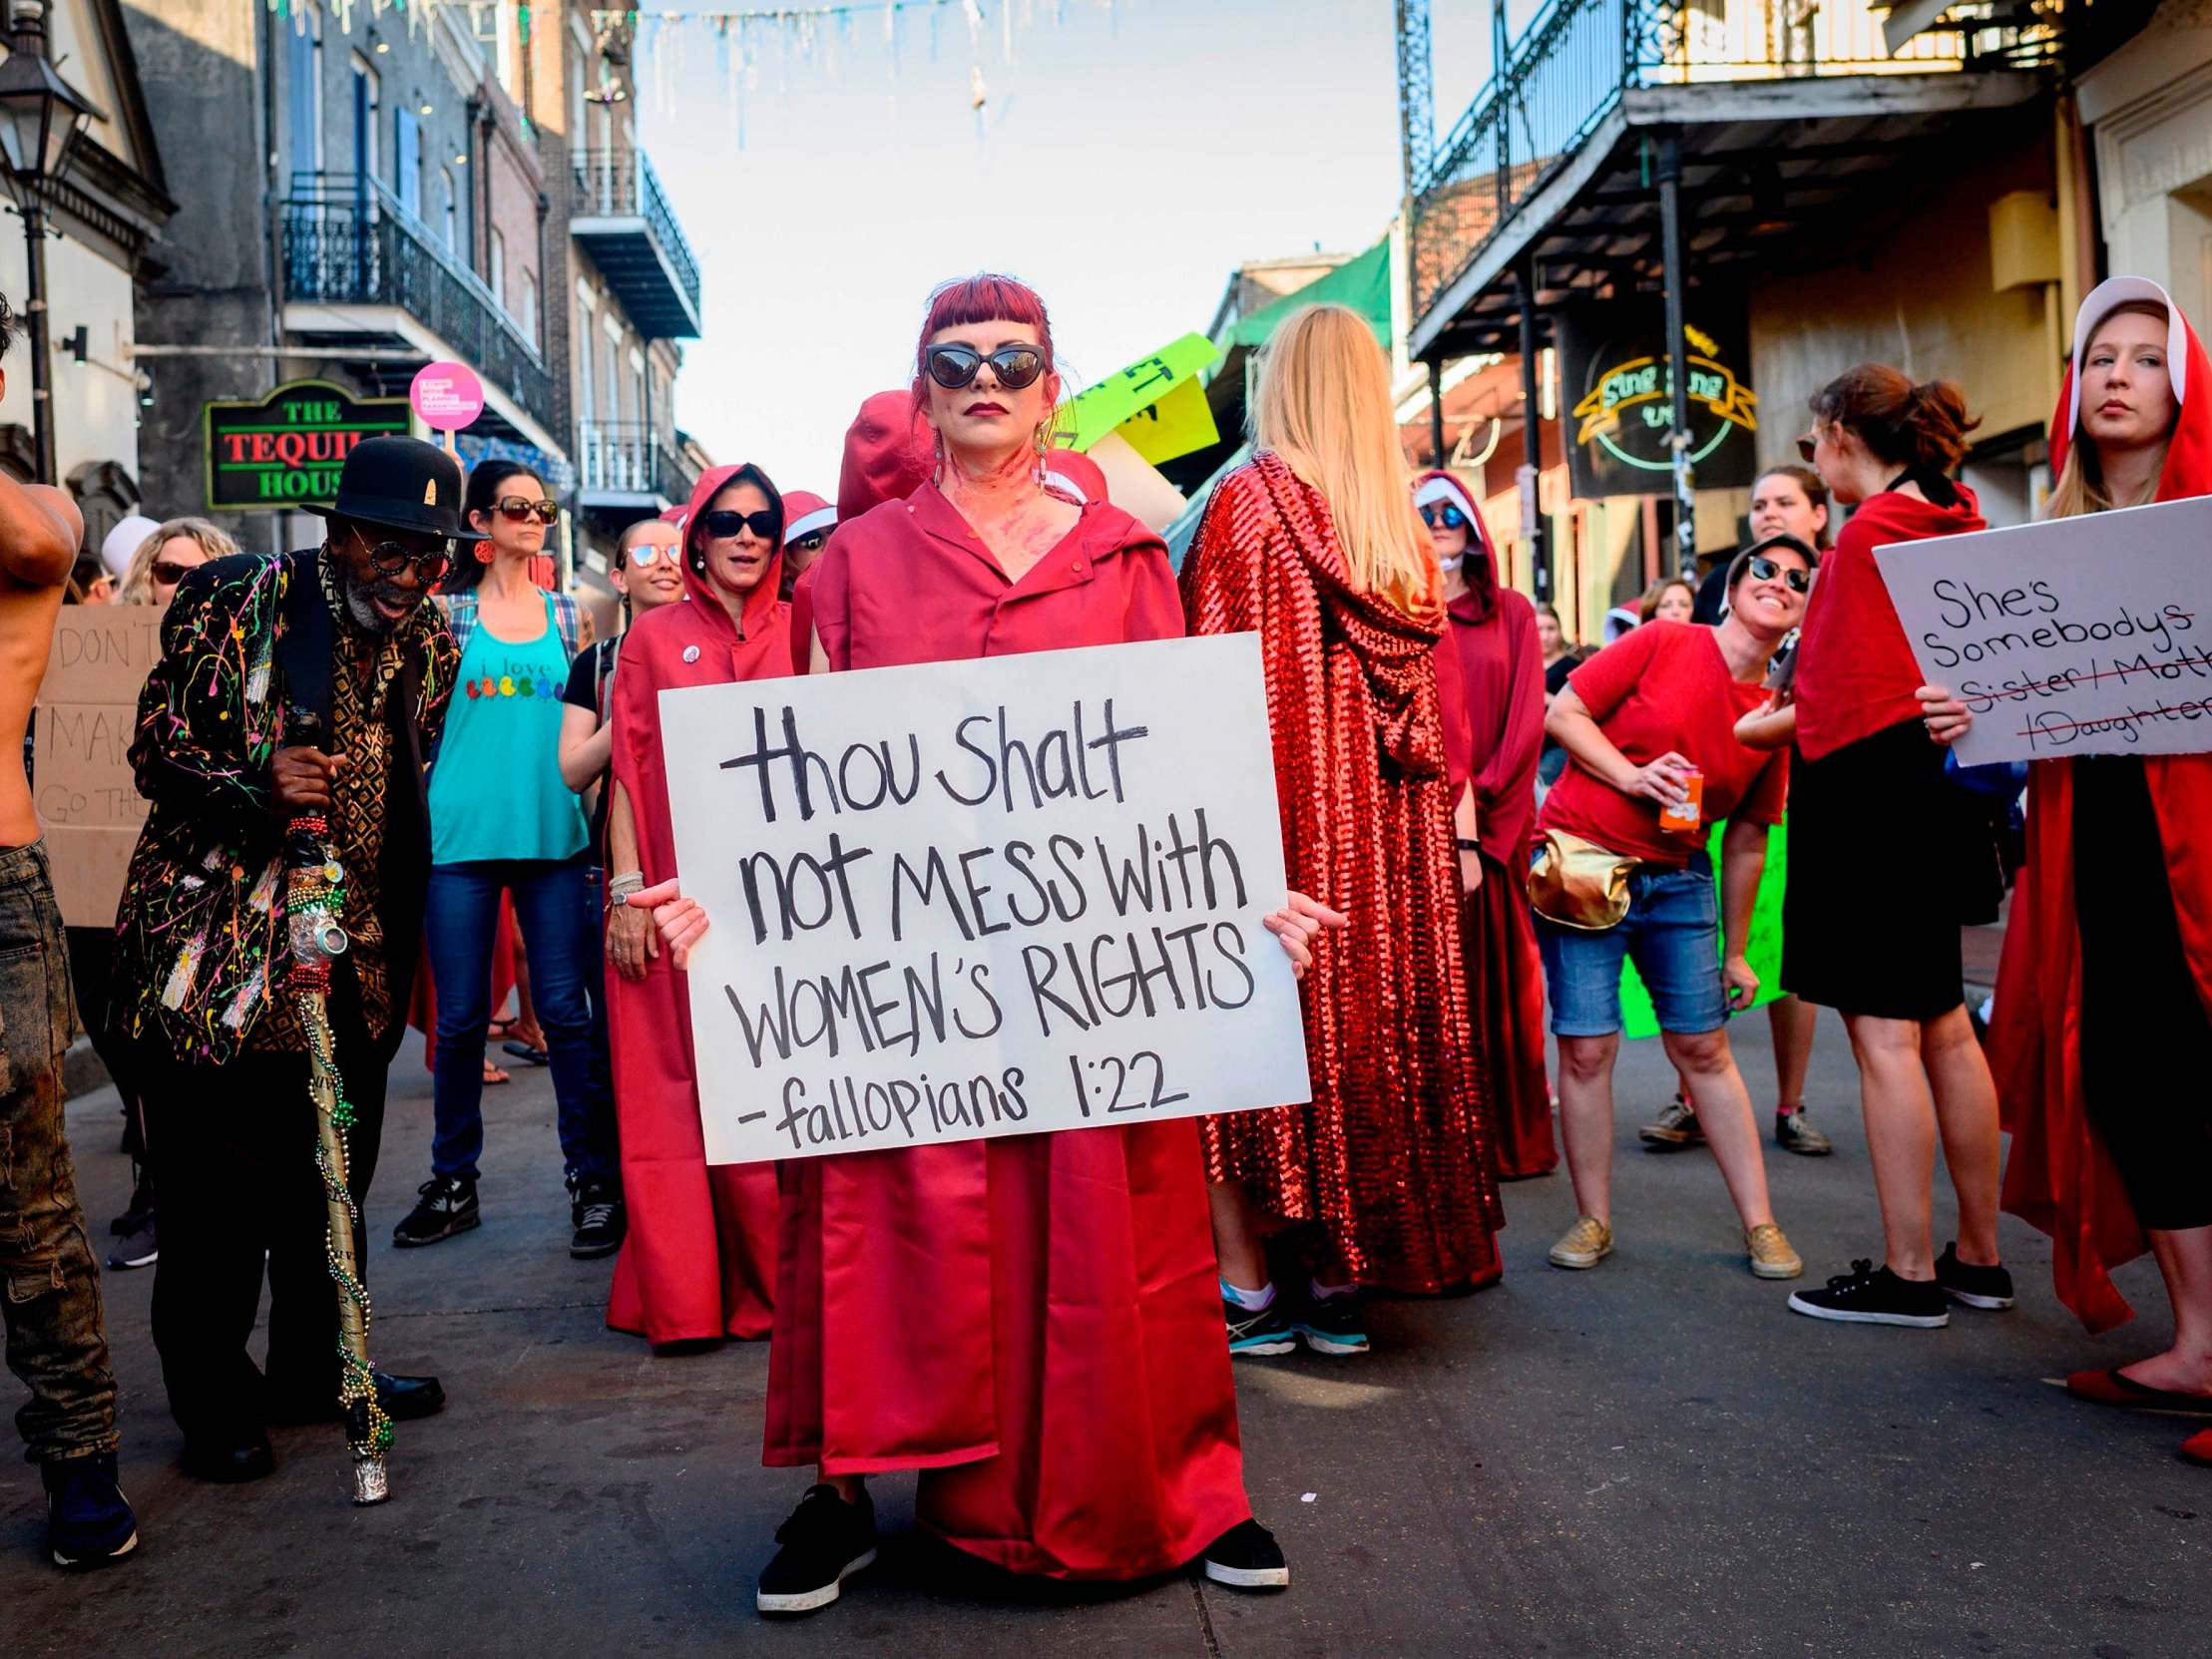 Handmaid-themed protesters march in the French Quarter of New Orleans, Louisiana, to protest the proposed "heartbeat bill" that bans abortion after six weeks in that state.